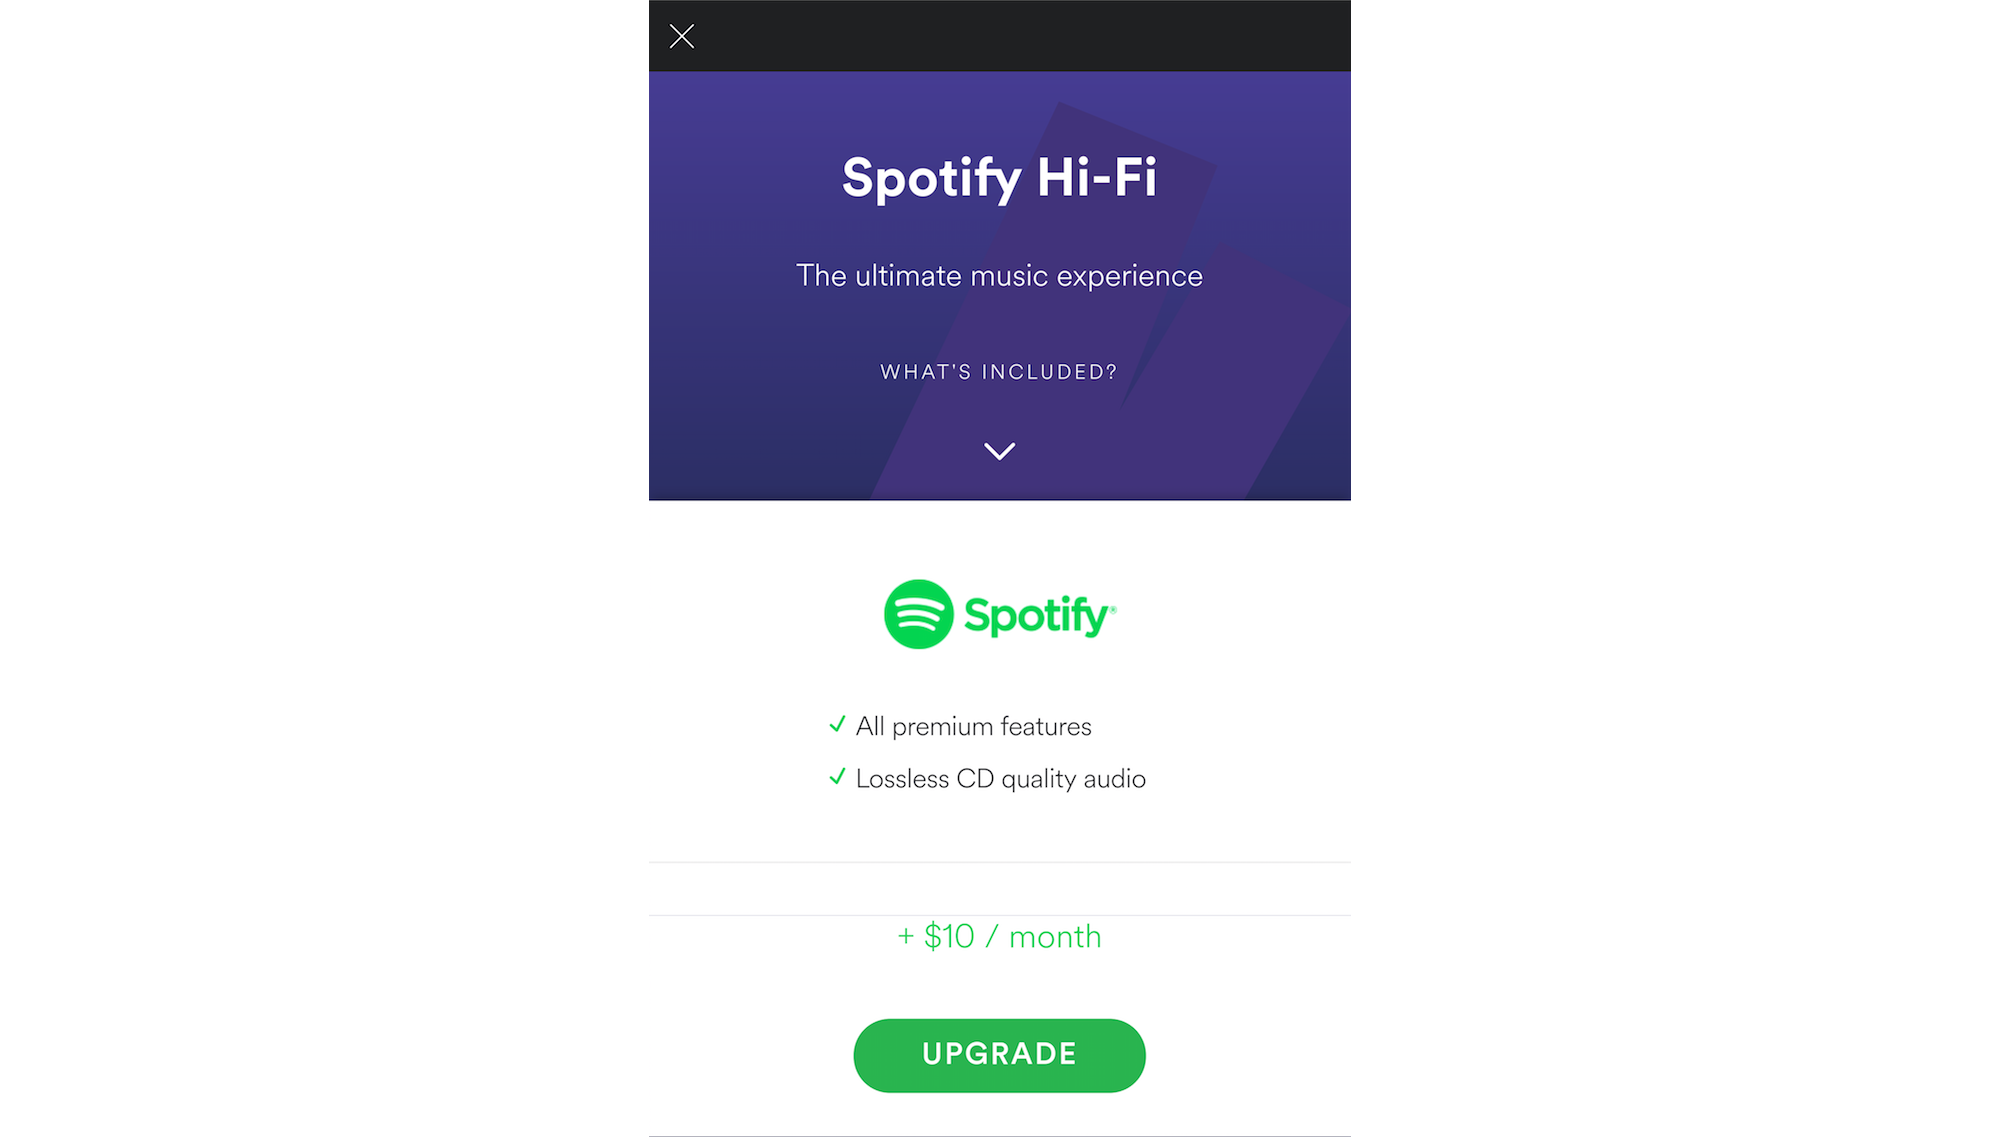 Spotify’s music is going Hi-Fi with a new subscription offering taking on Tidal